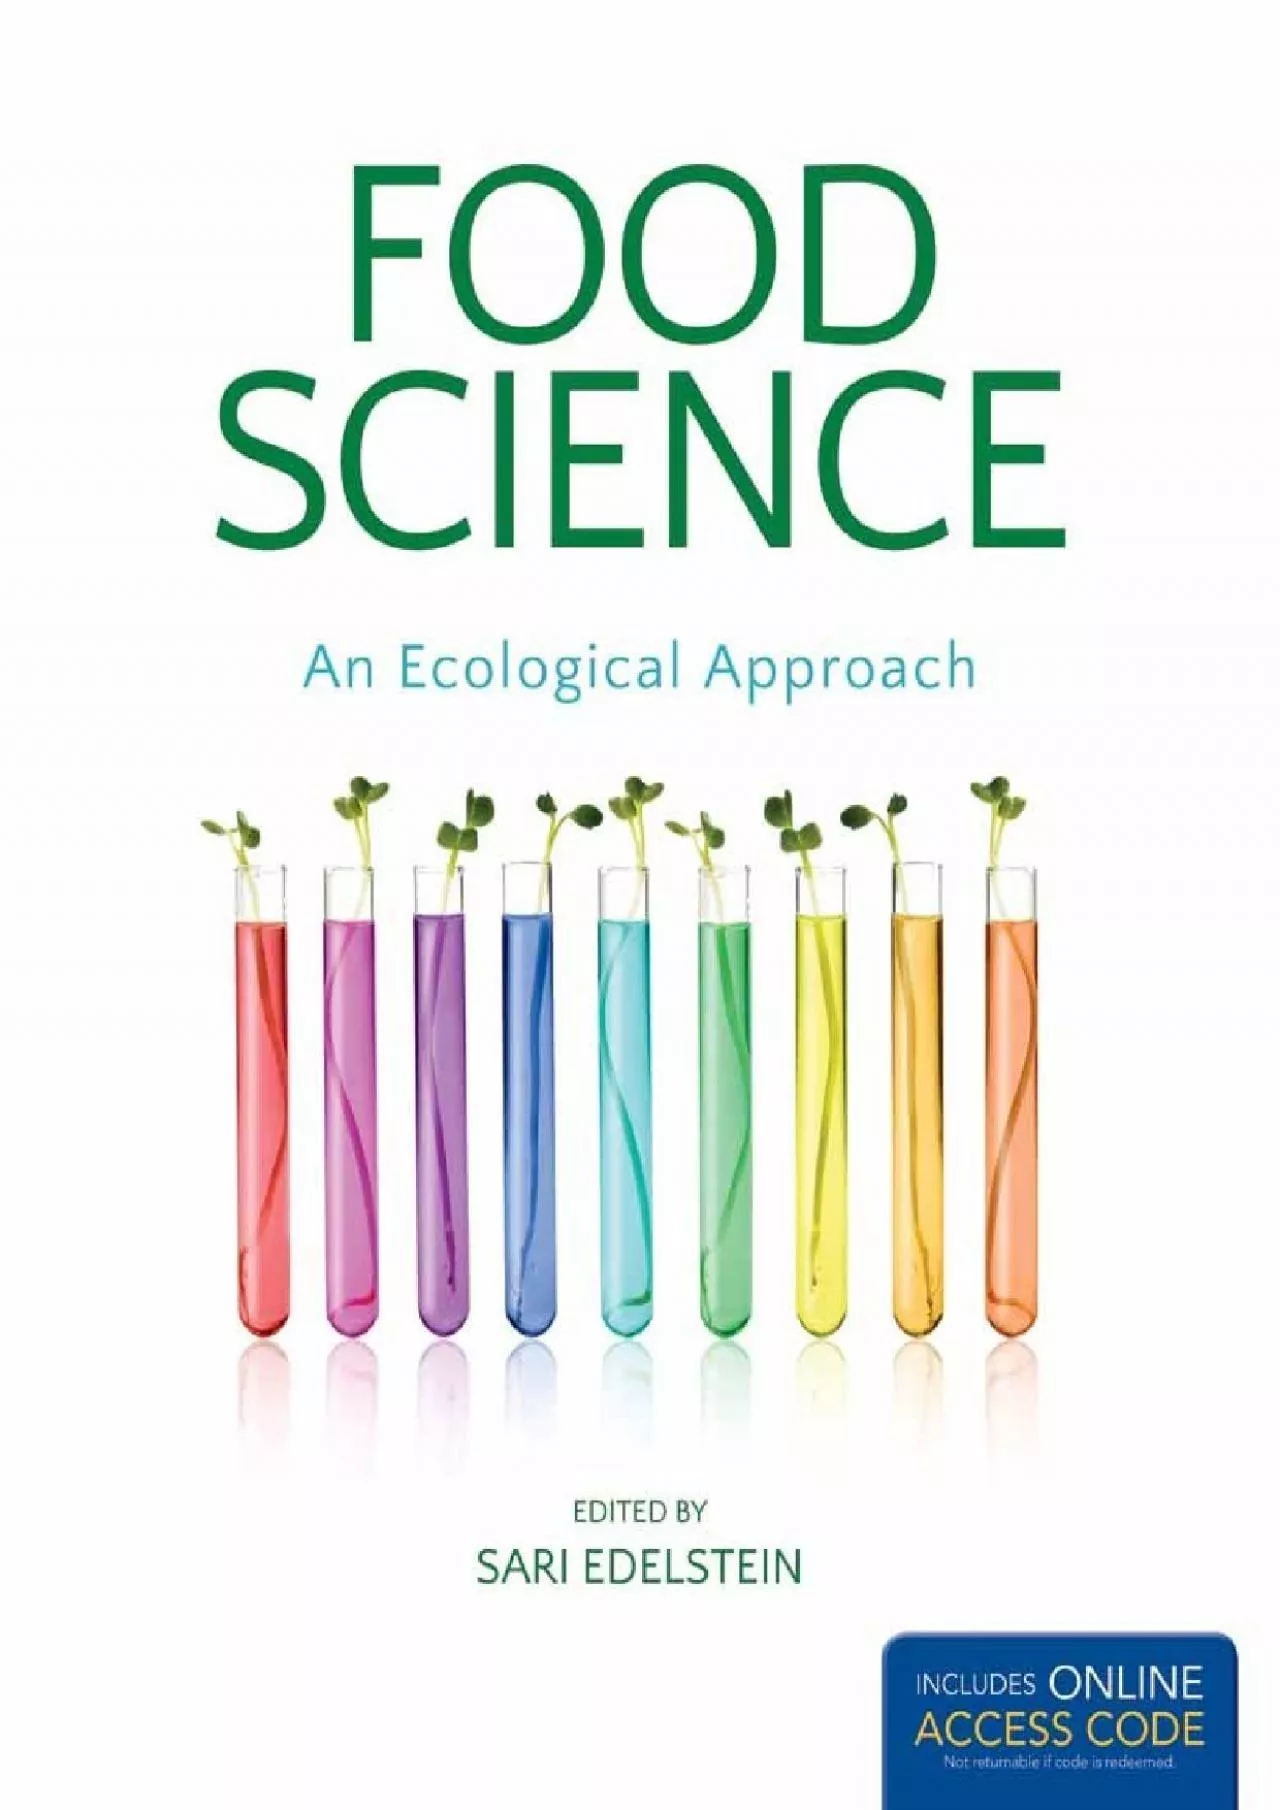 (BOOK)-Food Science, An Ecological Approach